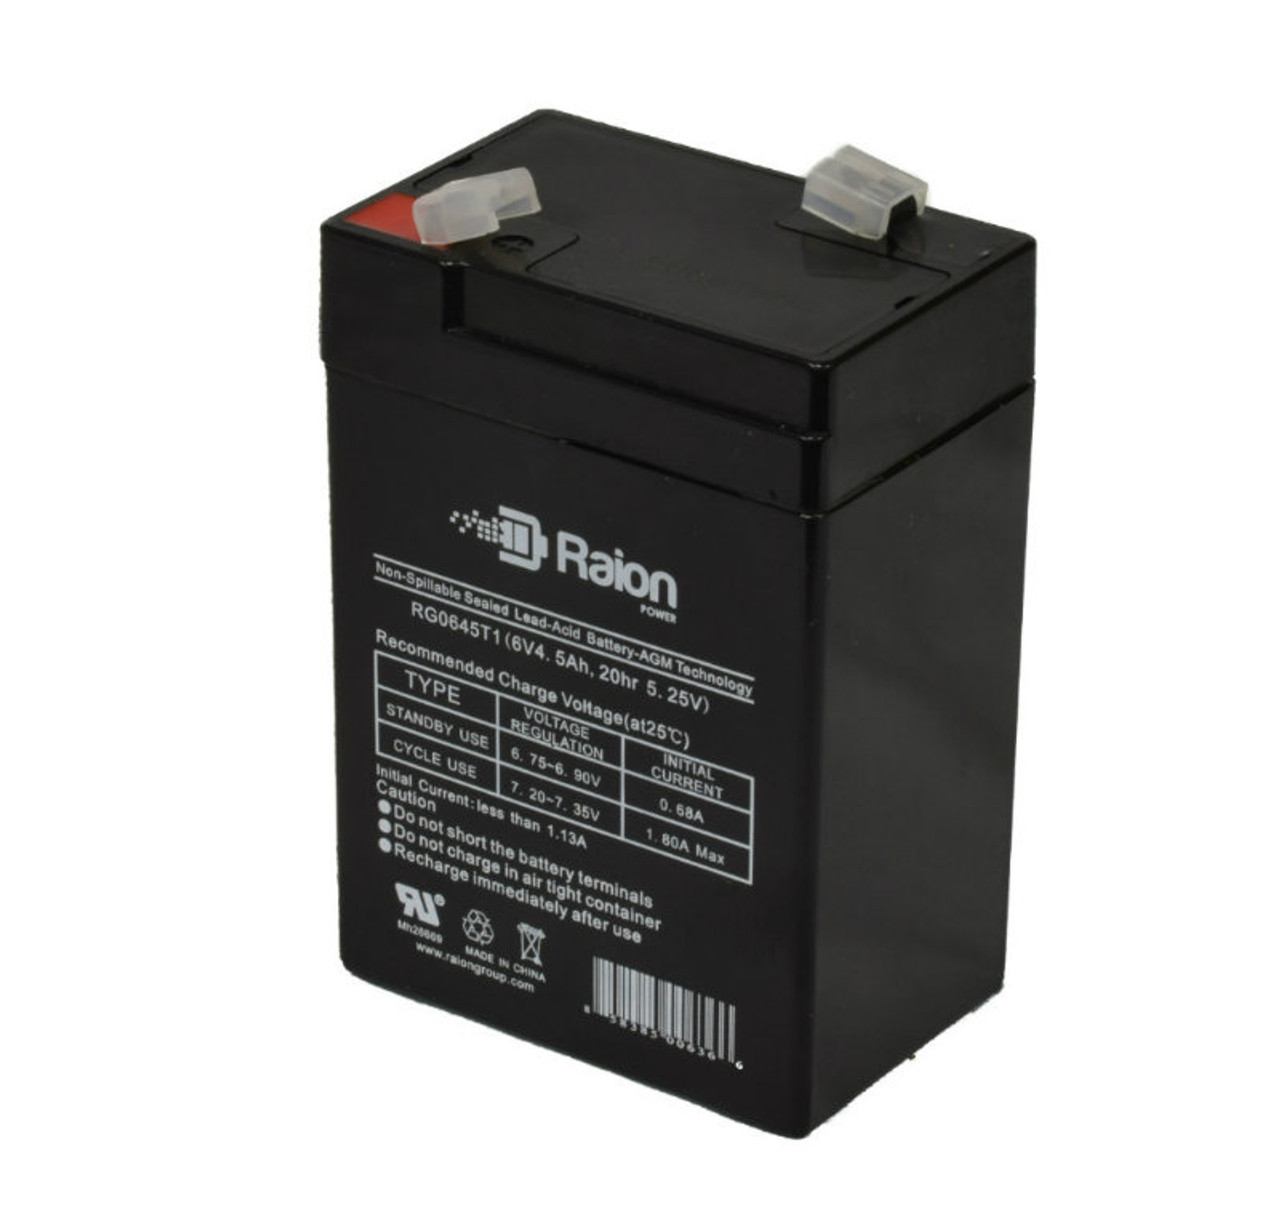 Raion Power RG0645T1 6V 4.5Ah Replacement Battery Cartridge for MUST FC6-4.5